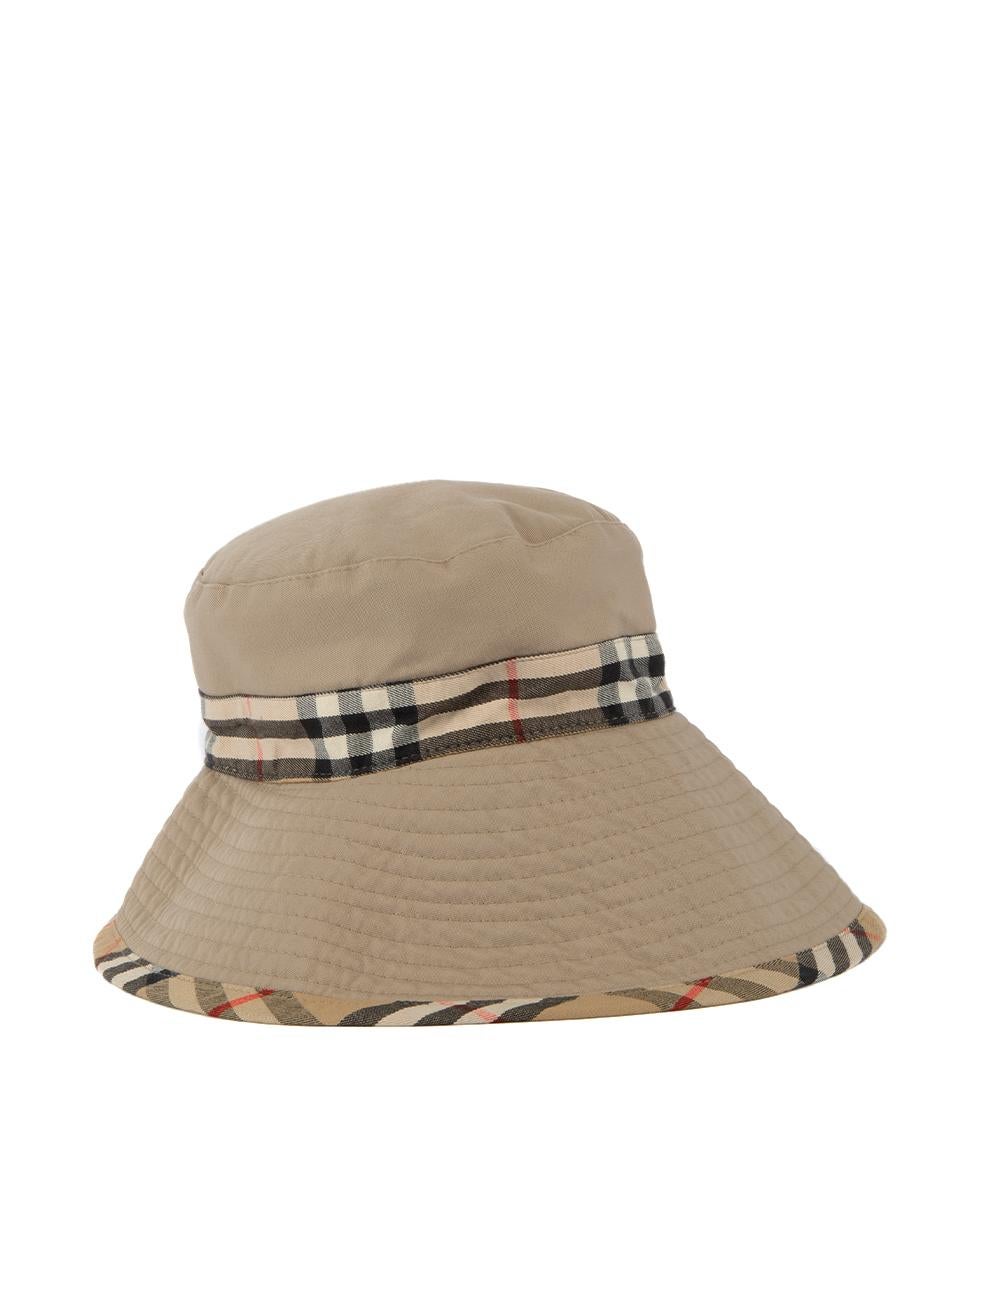 CONDITION is Very good. Hardly any wear to hat is evident. Slight discolouring to inner band on this used Burberrys designer resale item. Details Beige Cotton Bucket hat Quilted brim Nova check trimmings Made in Englans Composition NO COMPOSITION